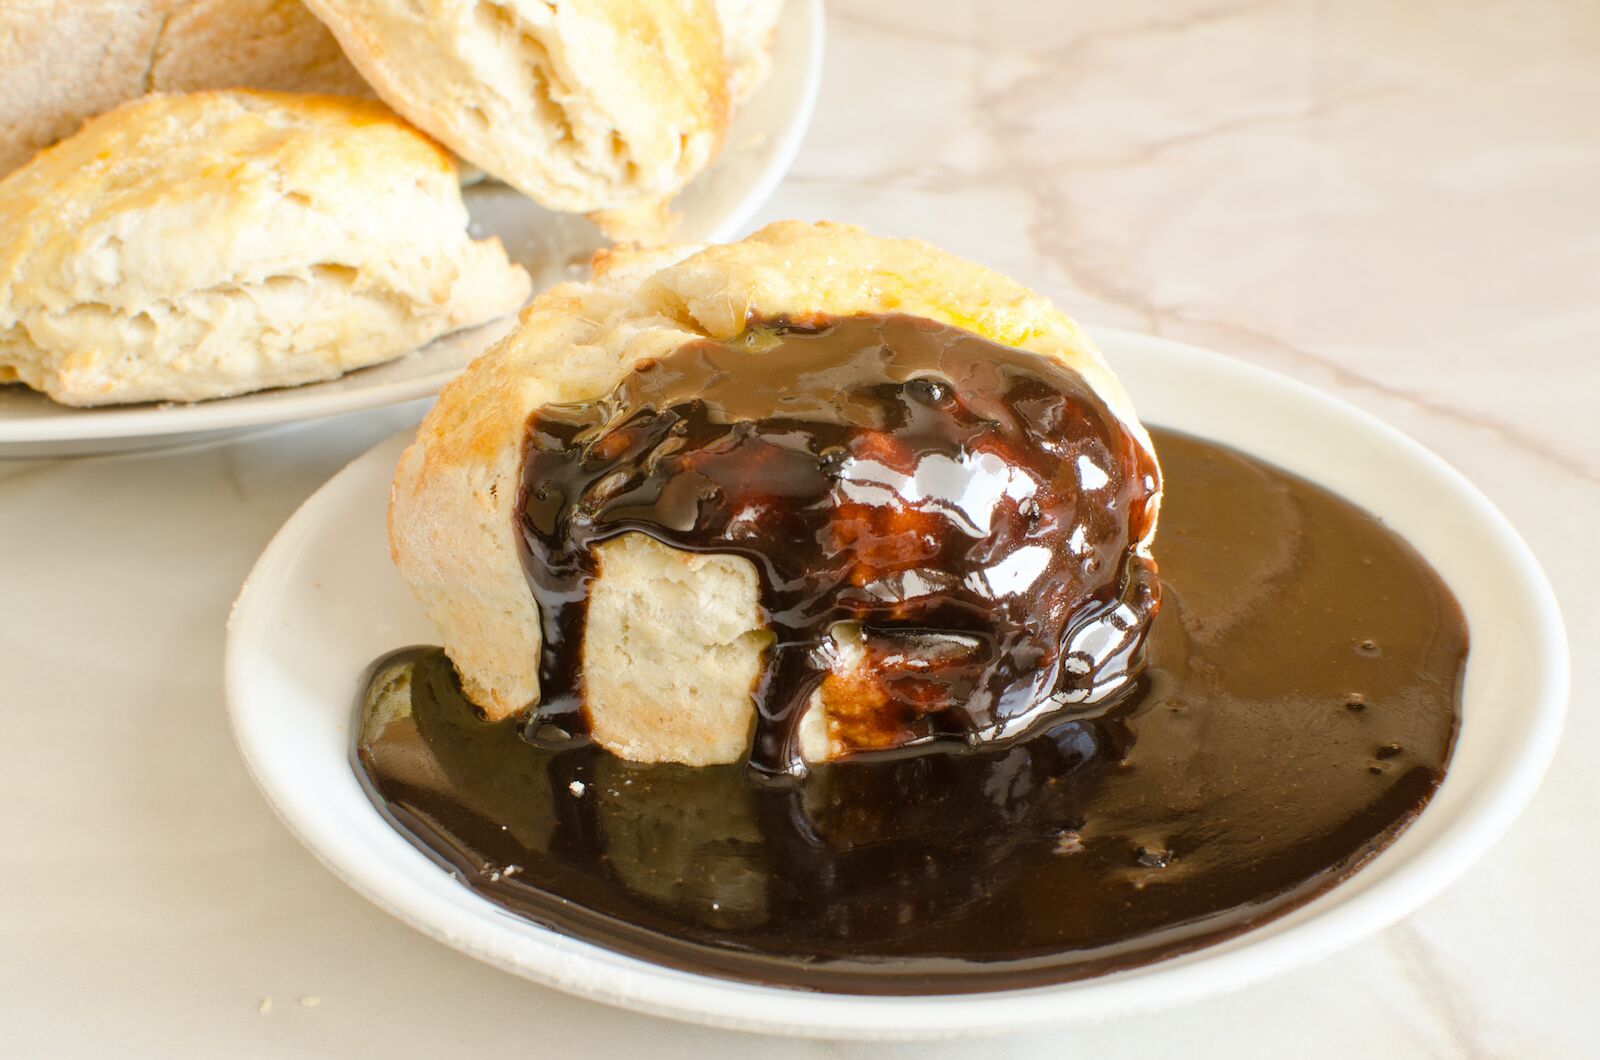 Biscuits with chocolate gravy